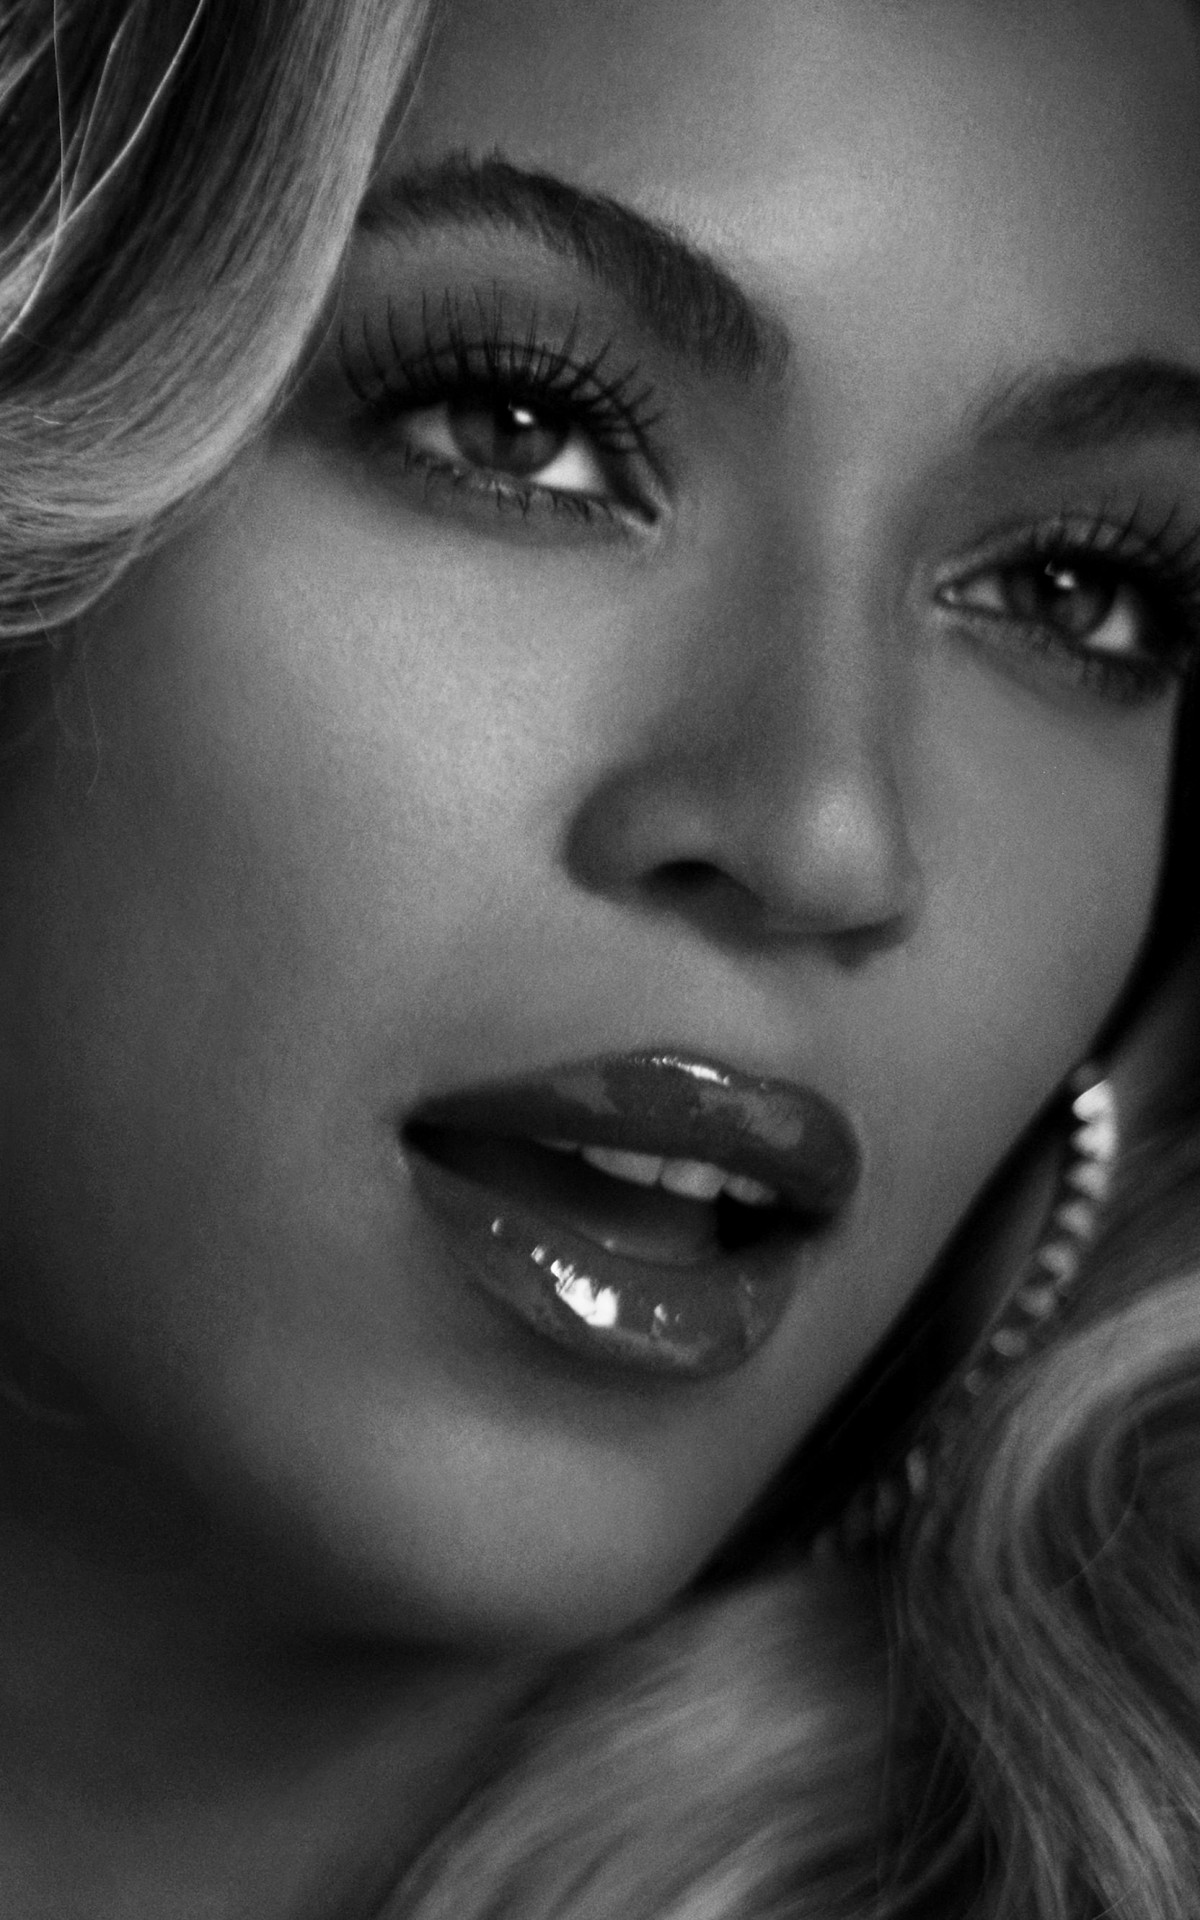 Beyonce in Black & White Wallpaper for Amazon Kindle Fire HDX